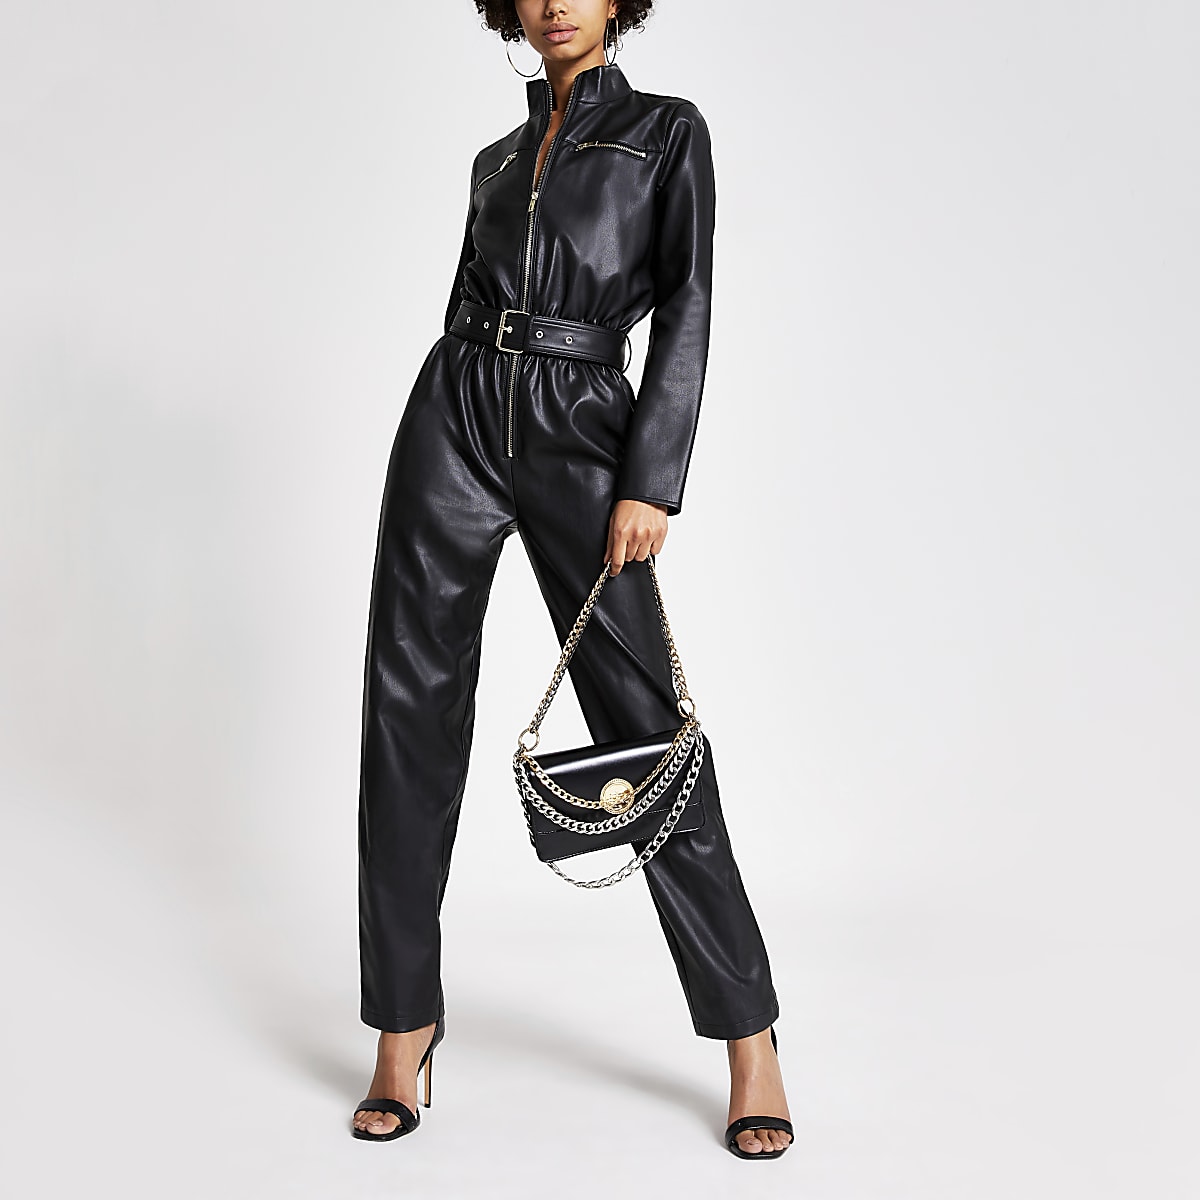 The faux leather River Island boiler suit that everyone in the office ...